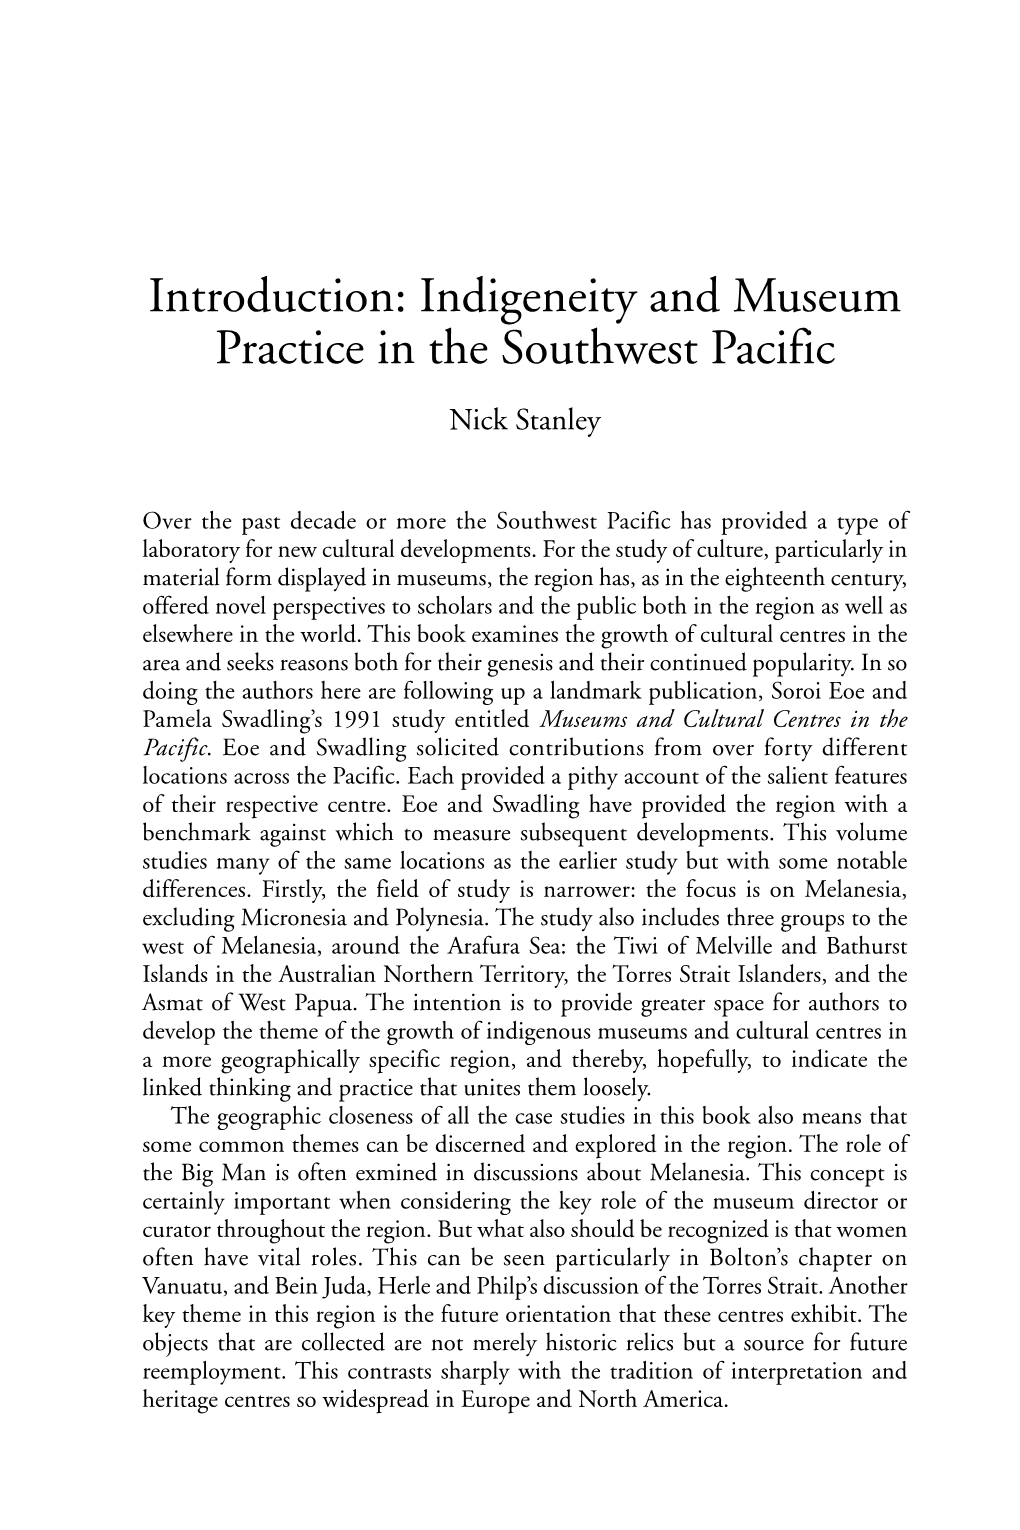 Indigeneity and Museum Practice in the Southwest Pacific Nick Stanley